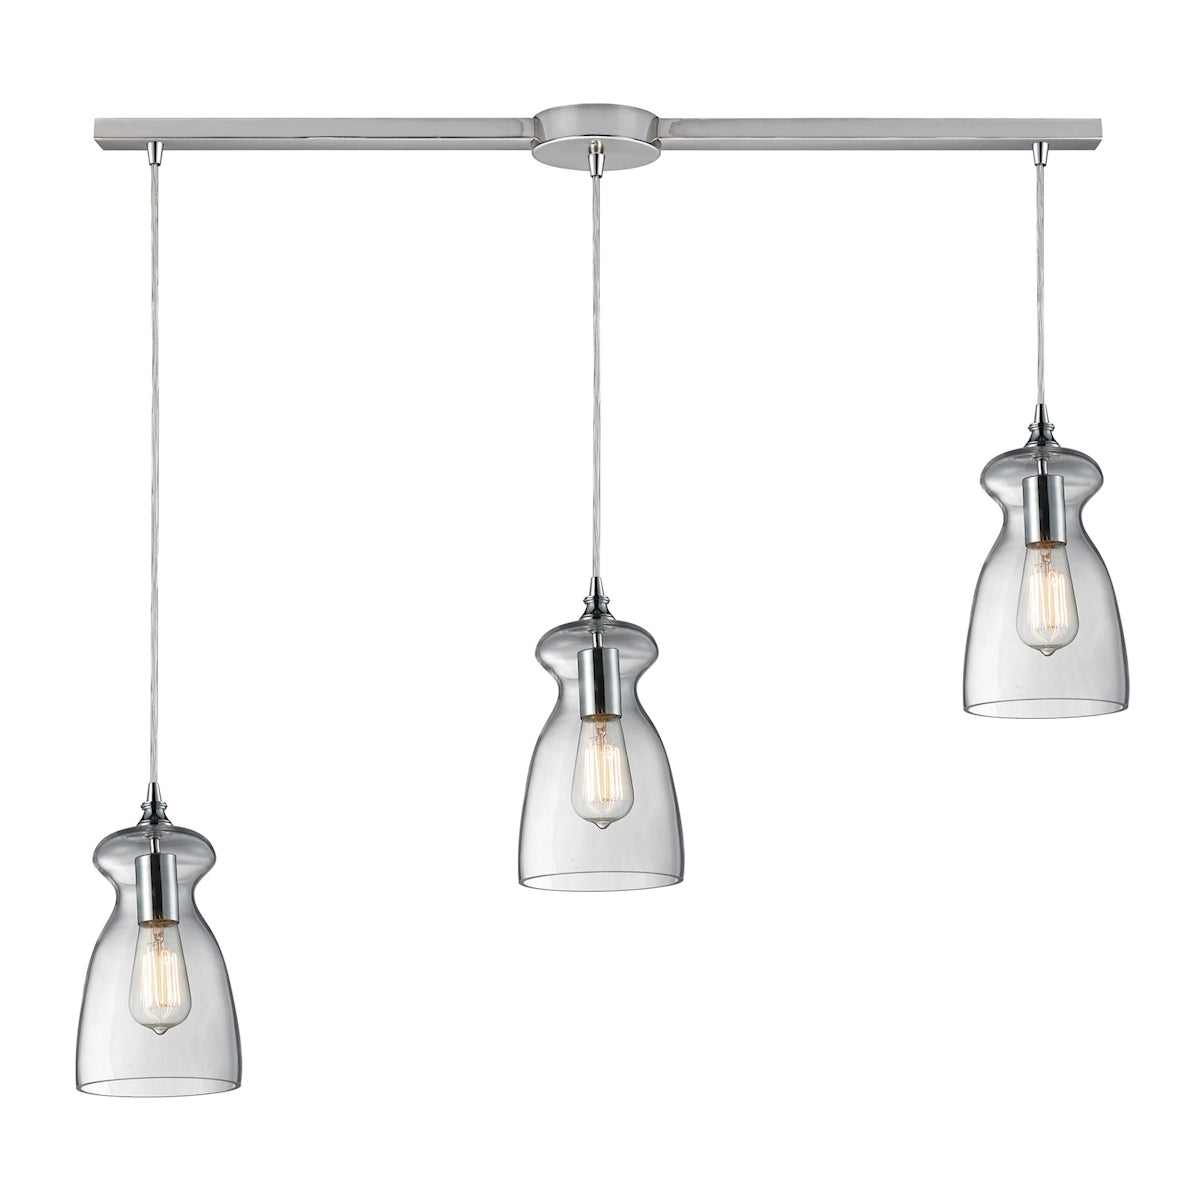 ELK Lighting 60053-3L Menlow Park 3-Light Linear Pendant Fixture in Polished Chrome with Smoked Glass